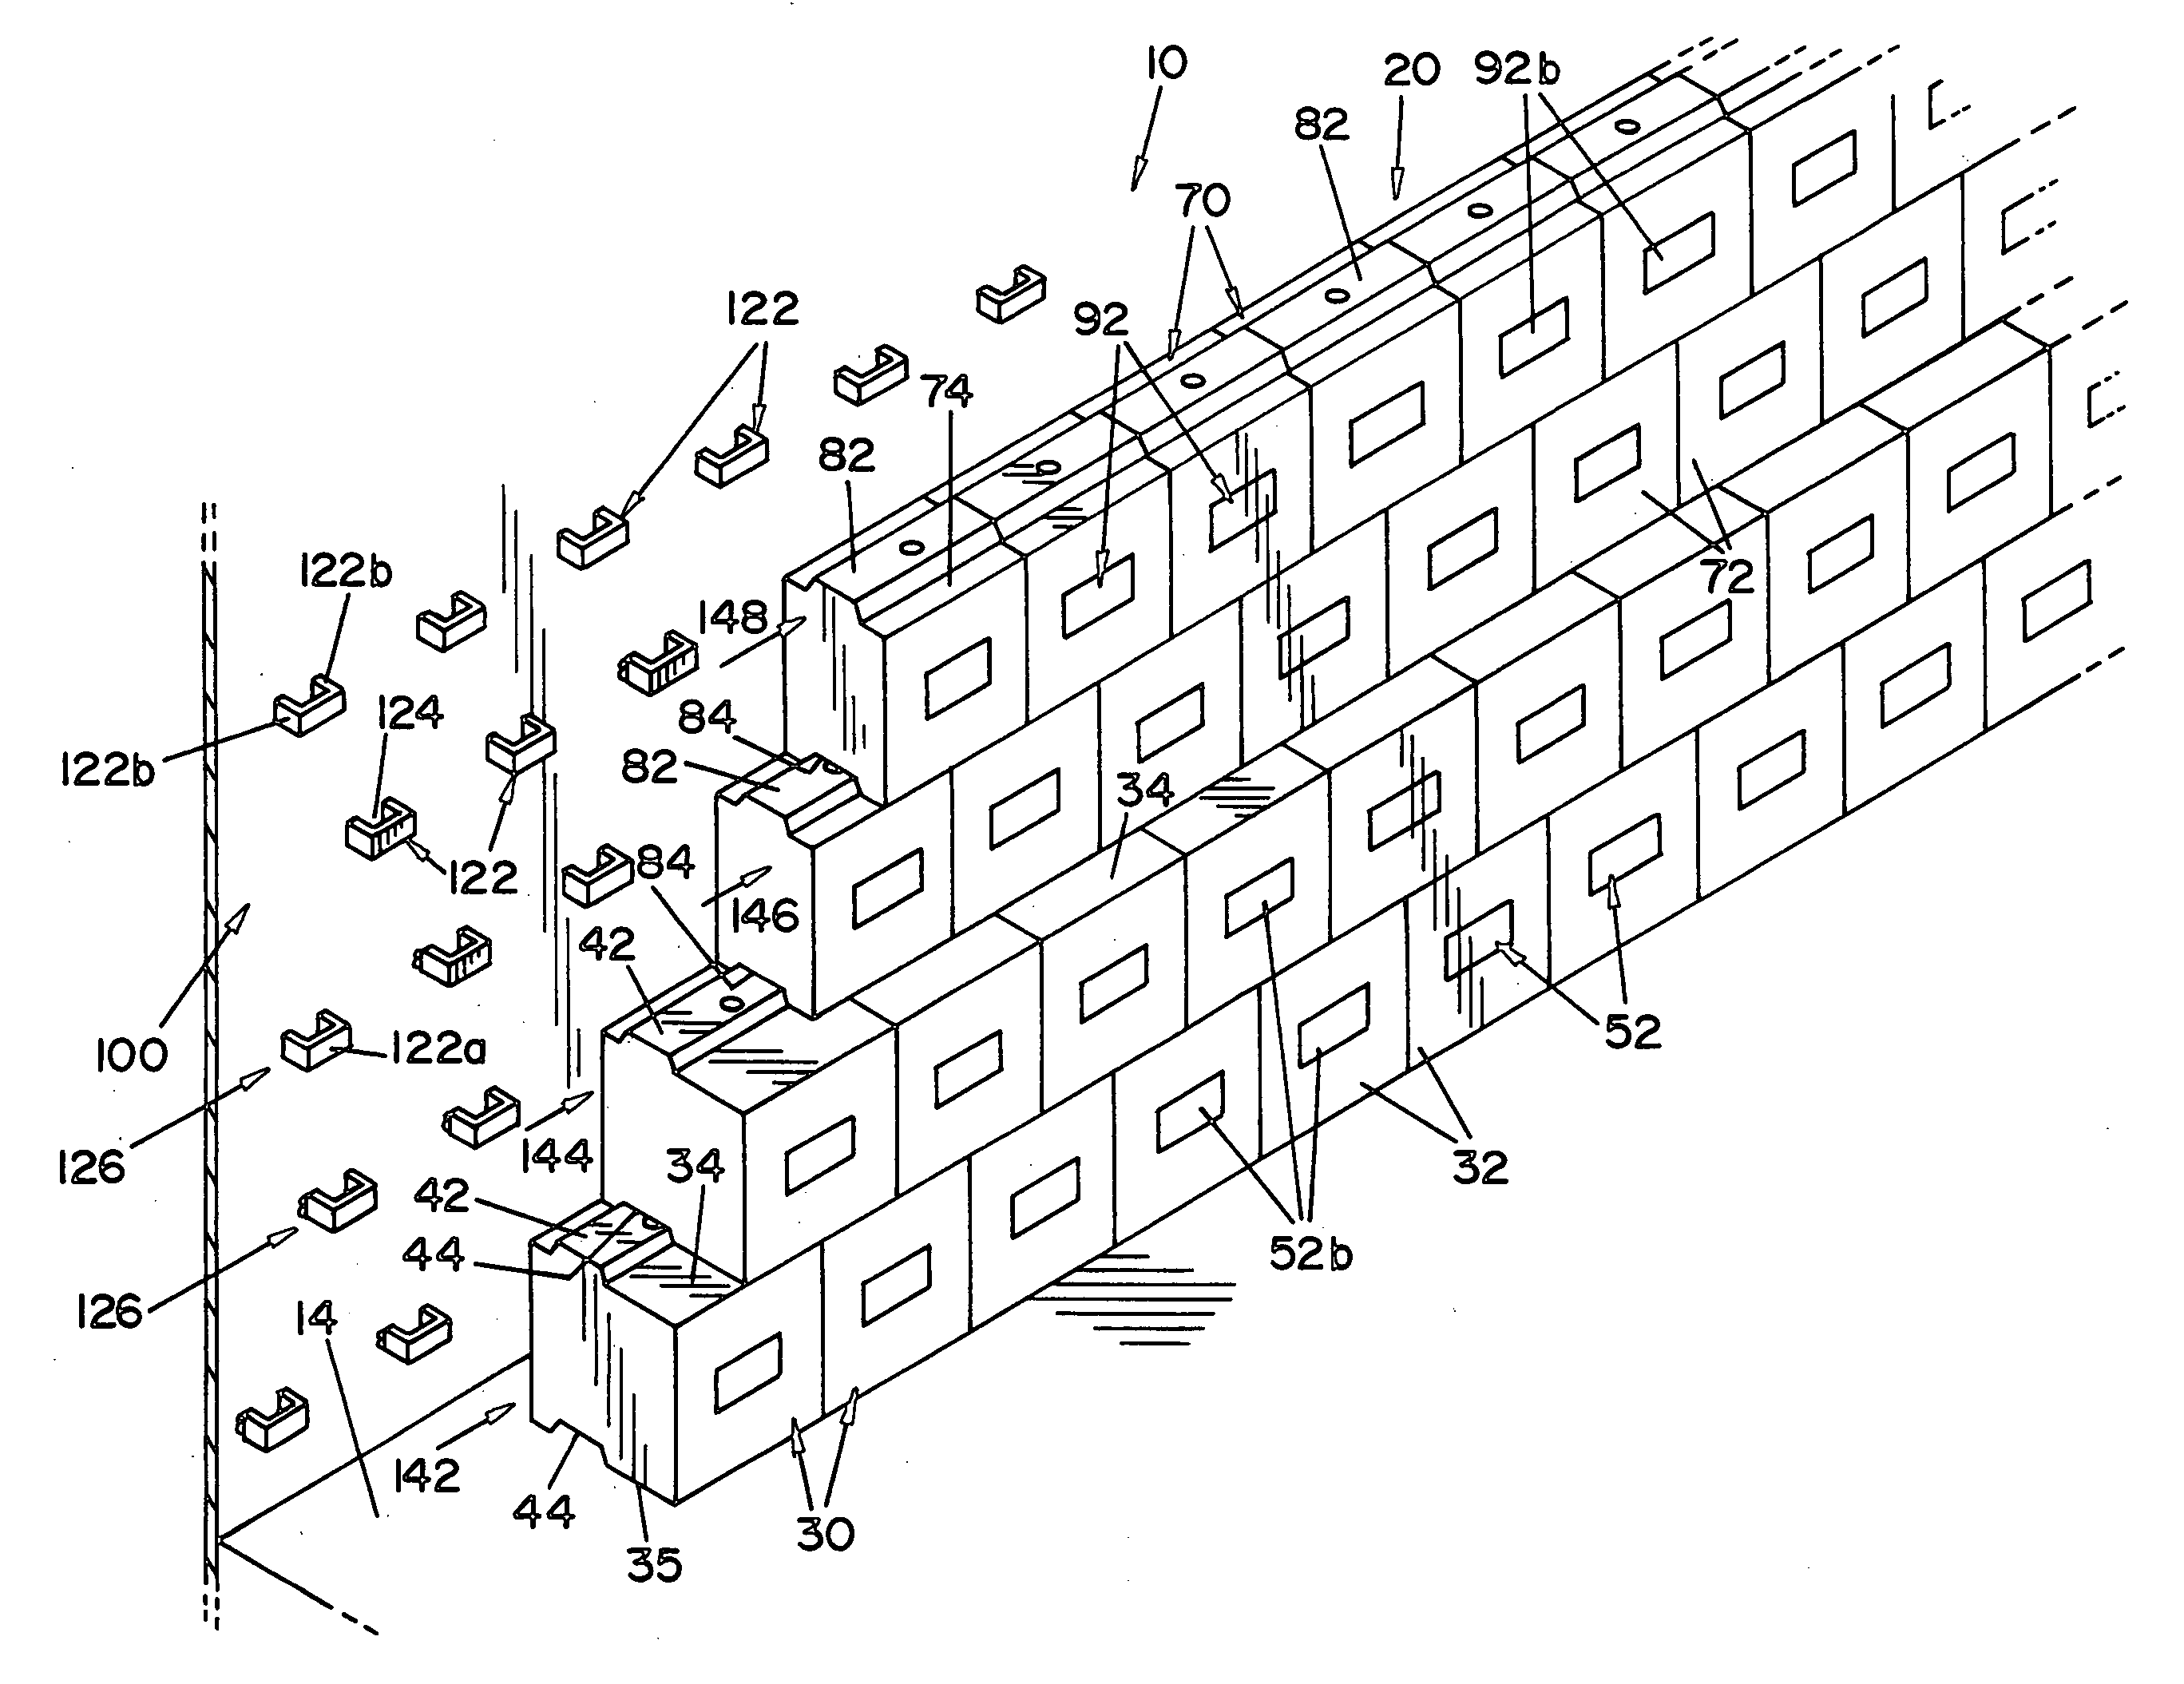 Refractory block and refractory wall assembly